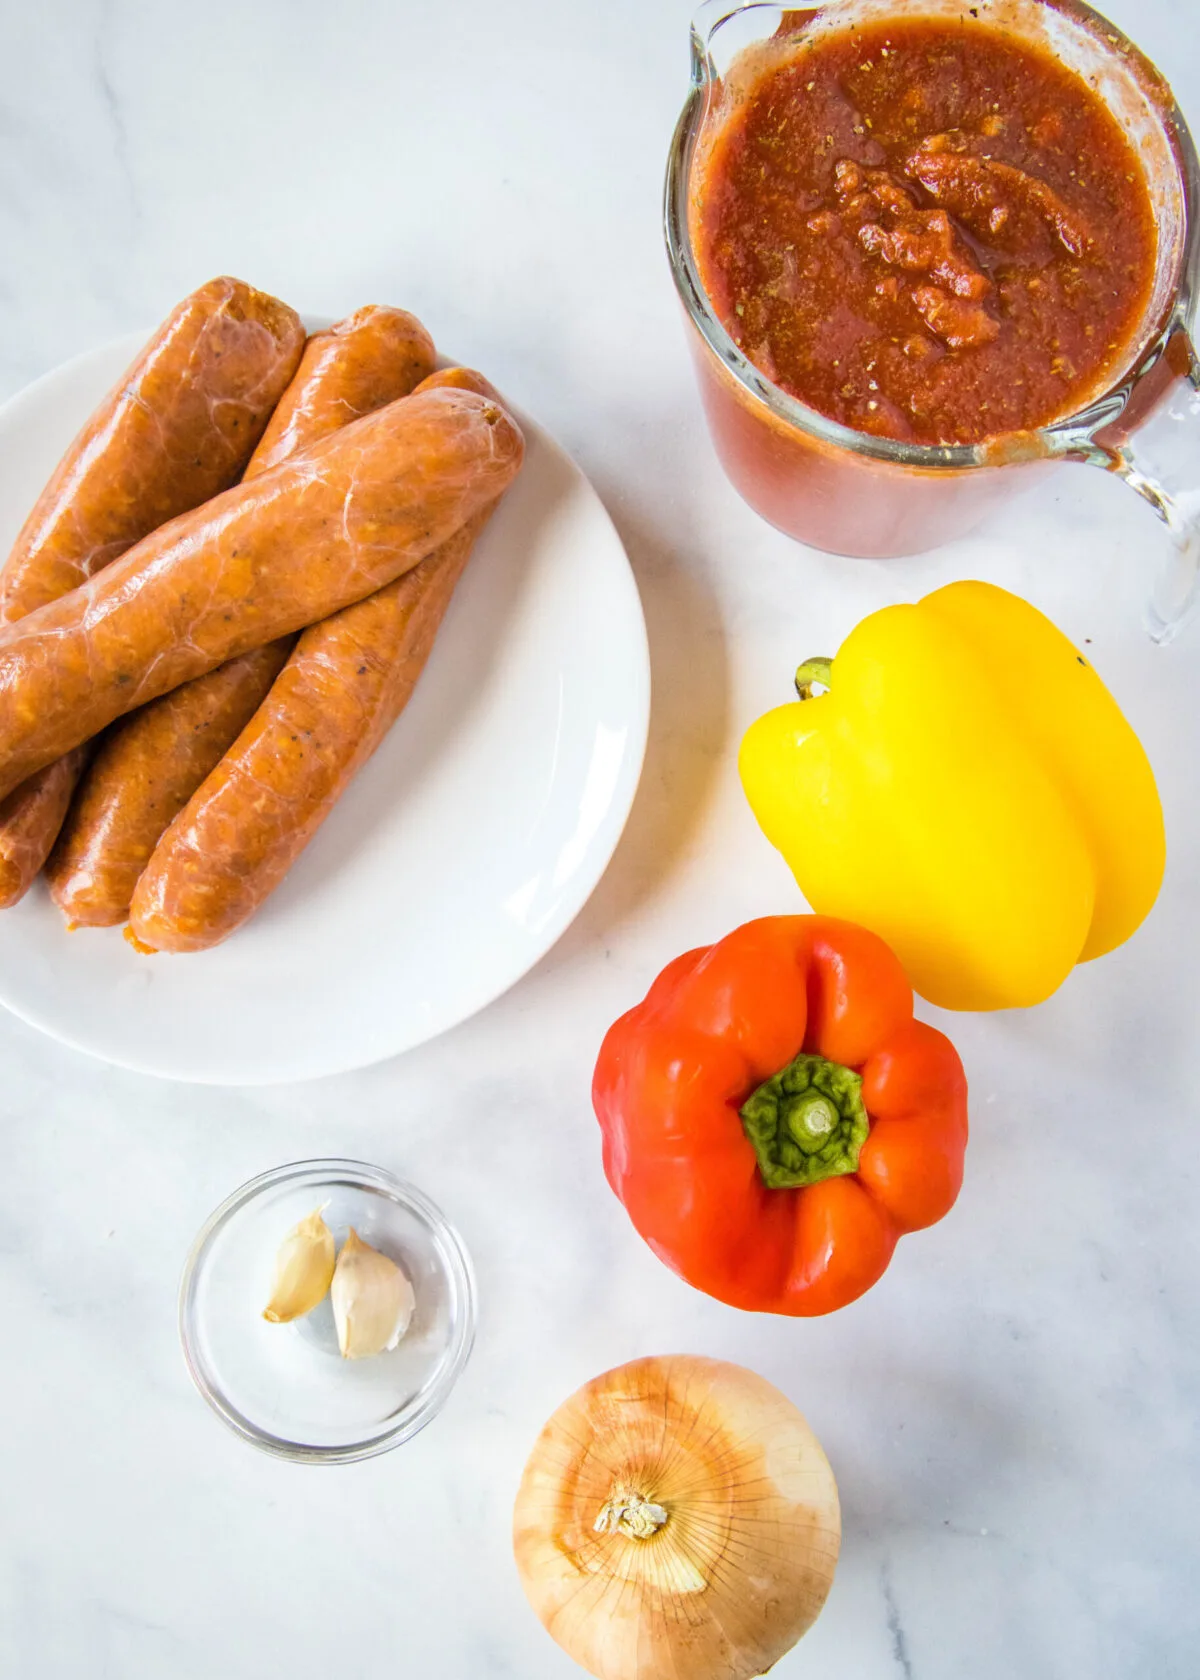 Overhead view of the ingredients needed for crock pot sausage and peppers: a plate of chicken sausage, a jar of marinara sauce, a yellow bell pepper, a red bell pepper, a yellow onion, and some garlic cloves